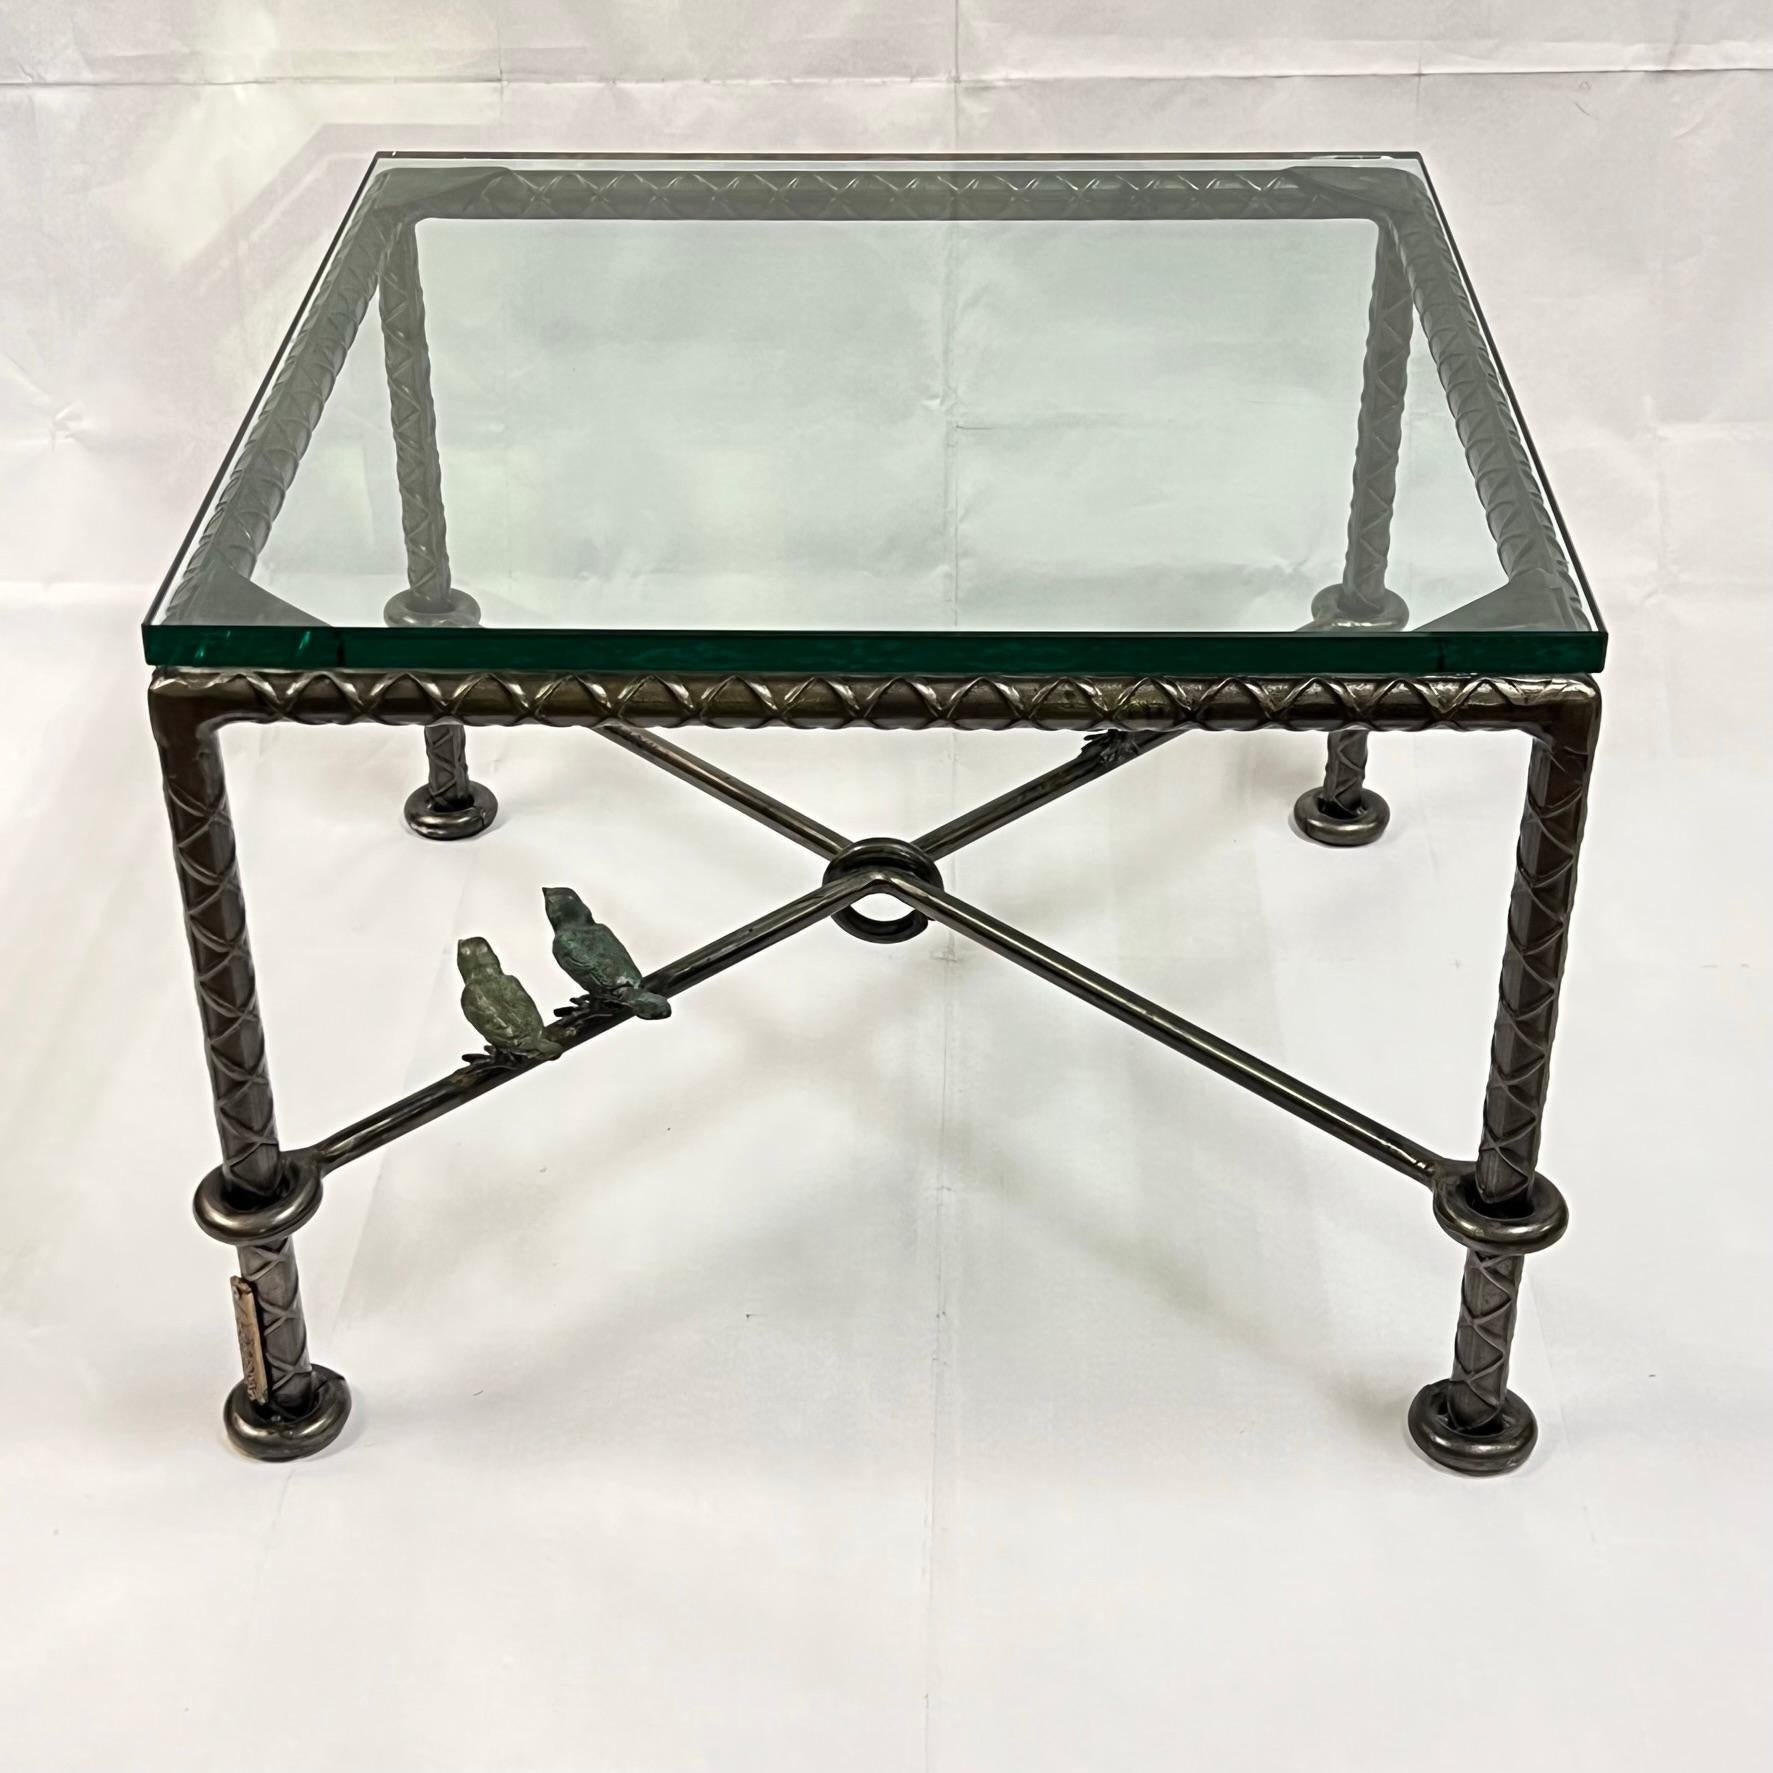 American Pair Steel and Glass Cocktail Tables by Ilana Goor, circa 1985 For Sale